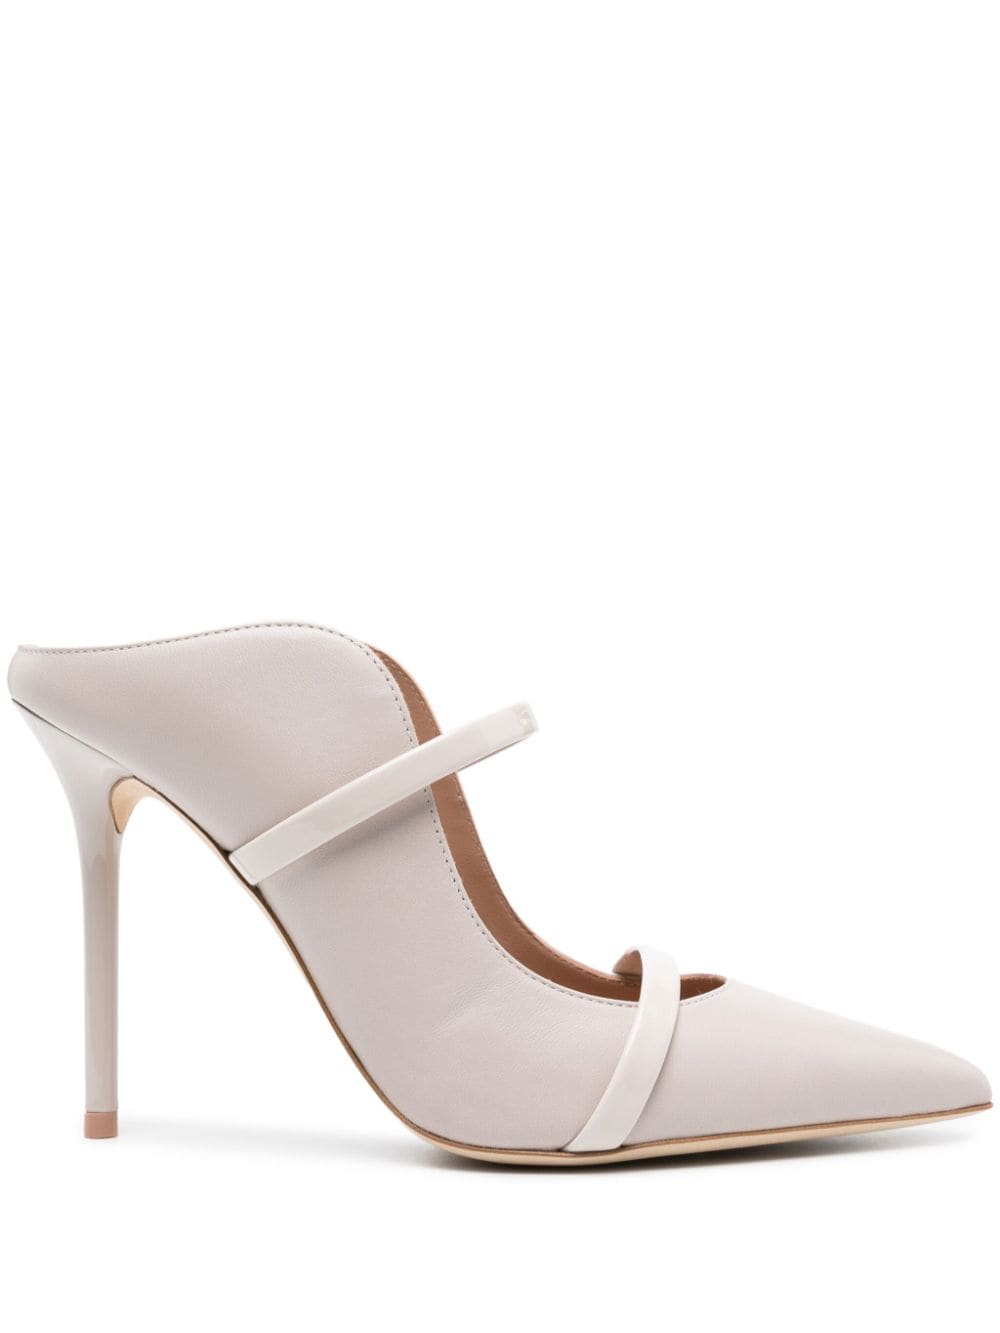 Malone Souliers 100mm Maureen leather mules - Nude von Malone Souliers